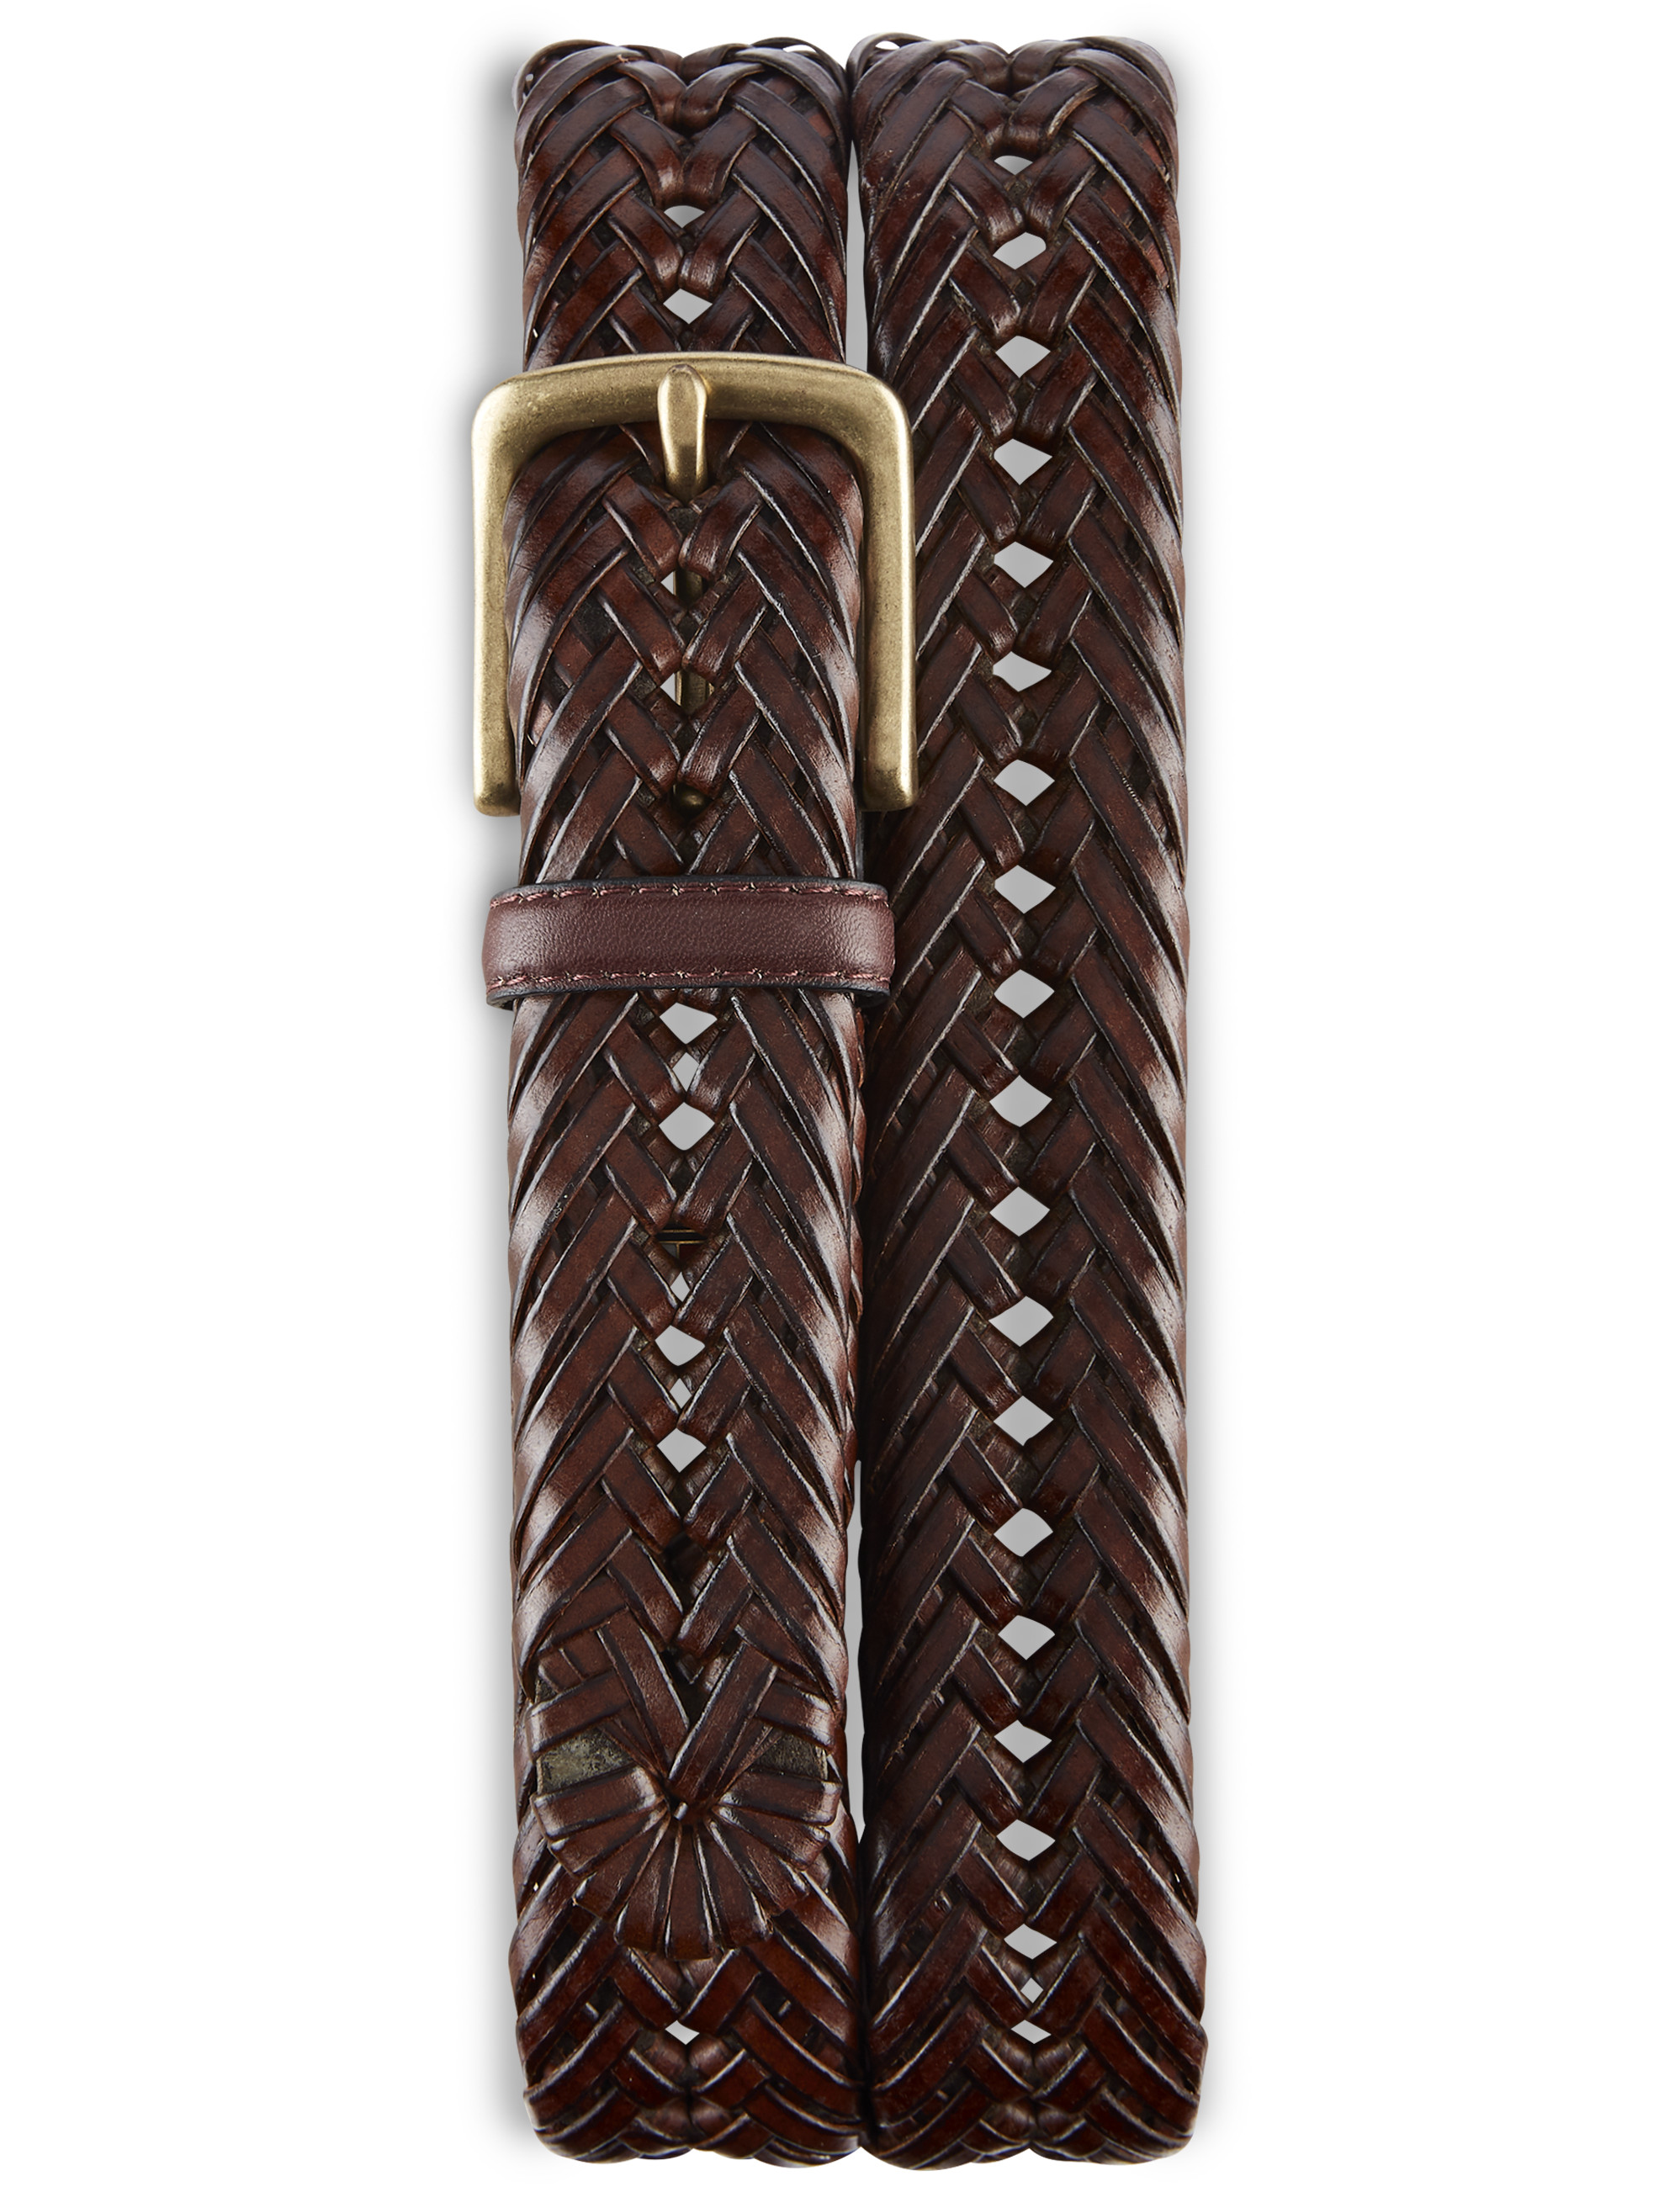 Tommy Hilfiger Mens Leather Braided Belt - Tan Brown - X-Large